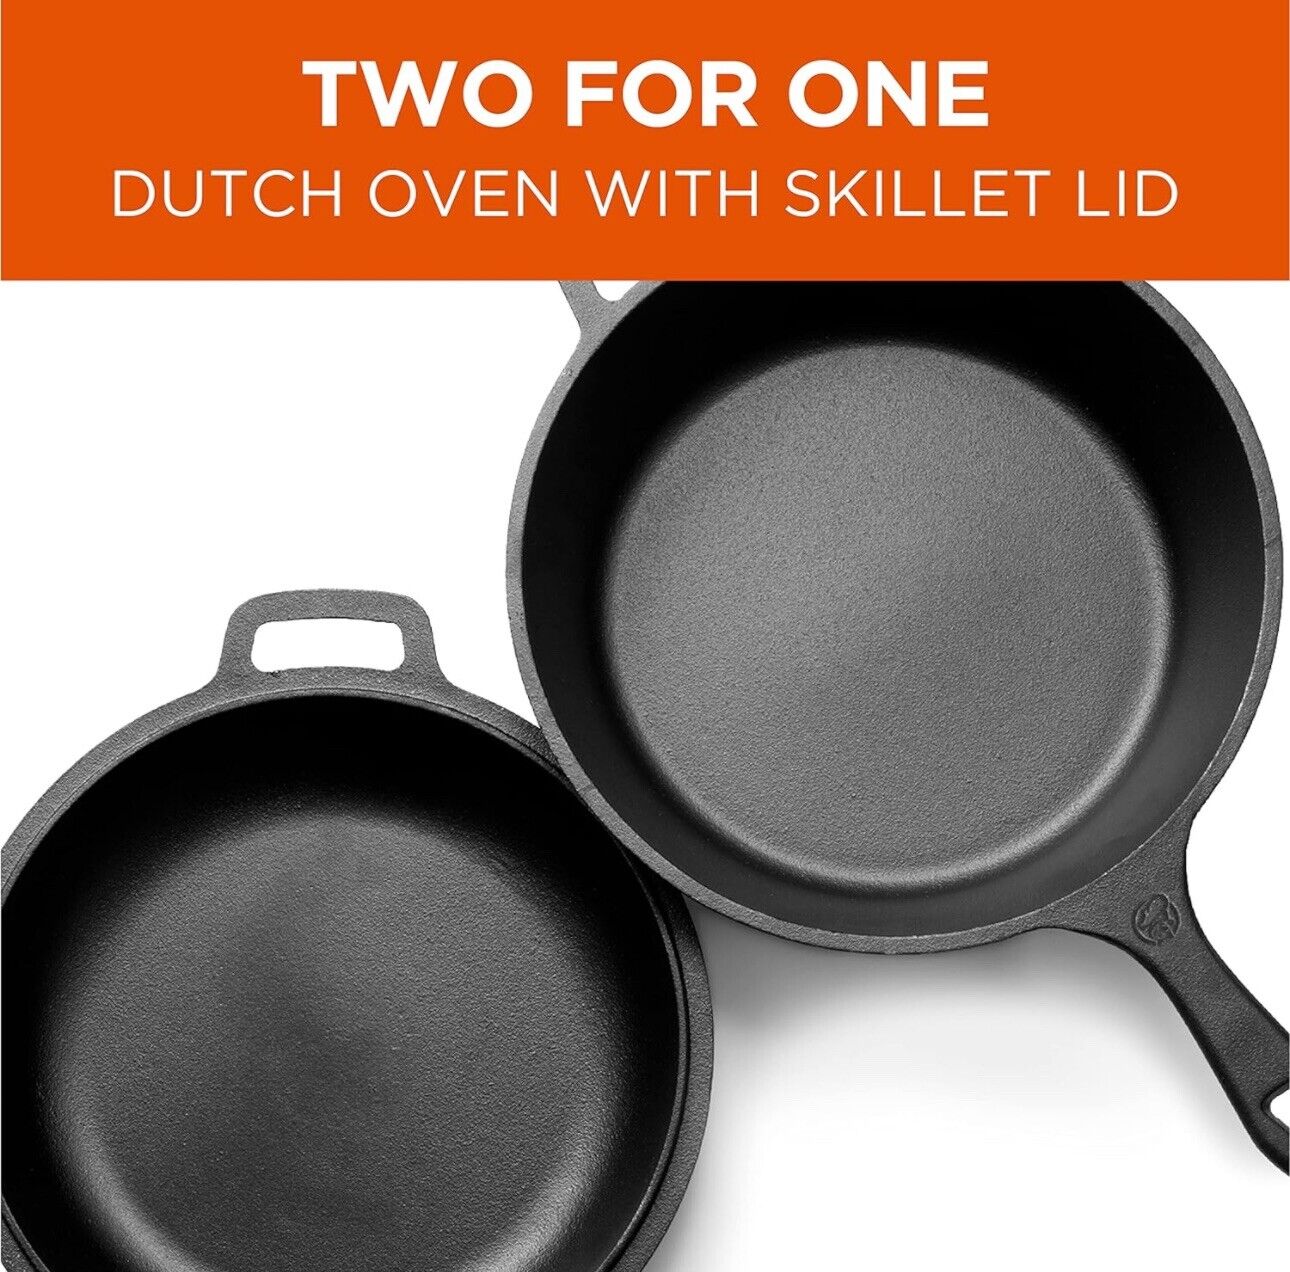 COMMERCIAL CHEF 3-Quart Iron Dutch Oven with Skillet Lid